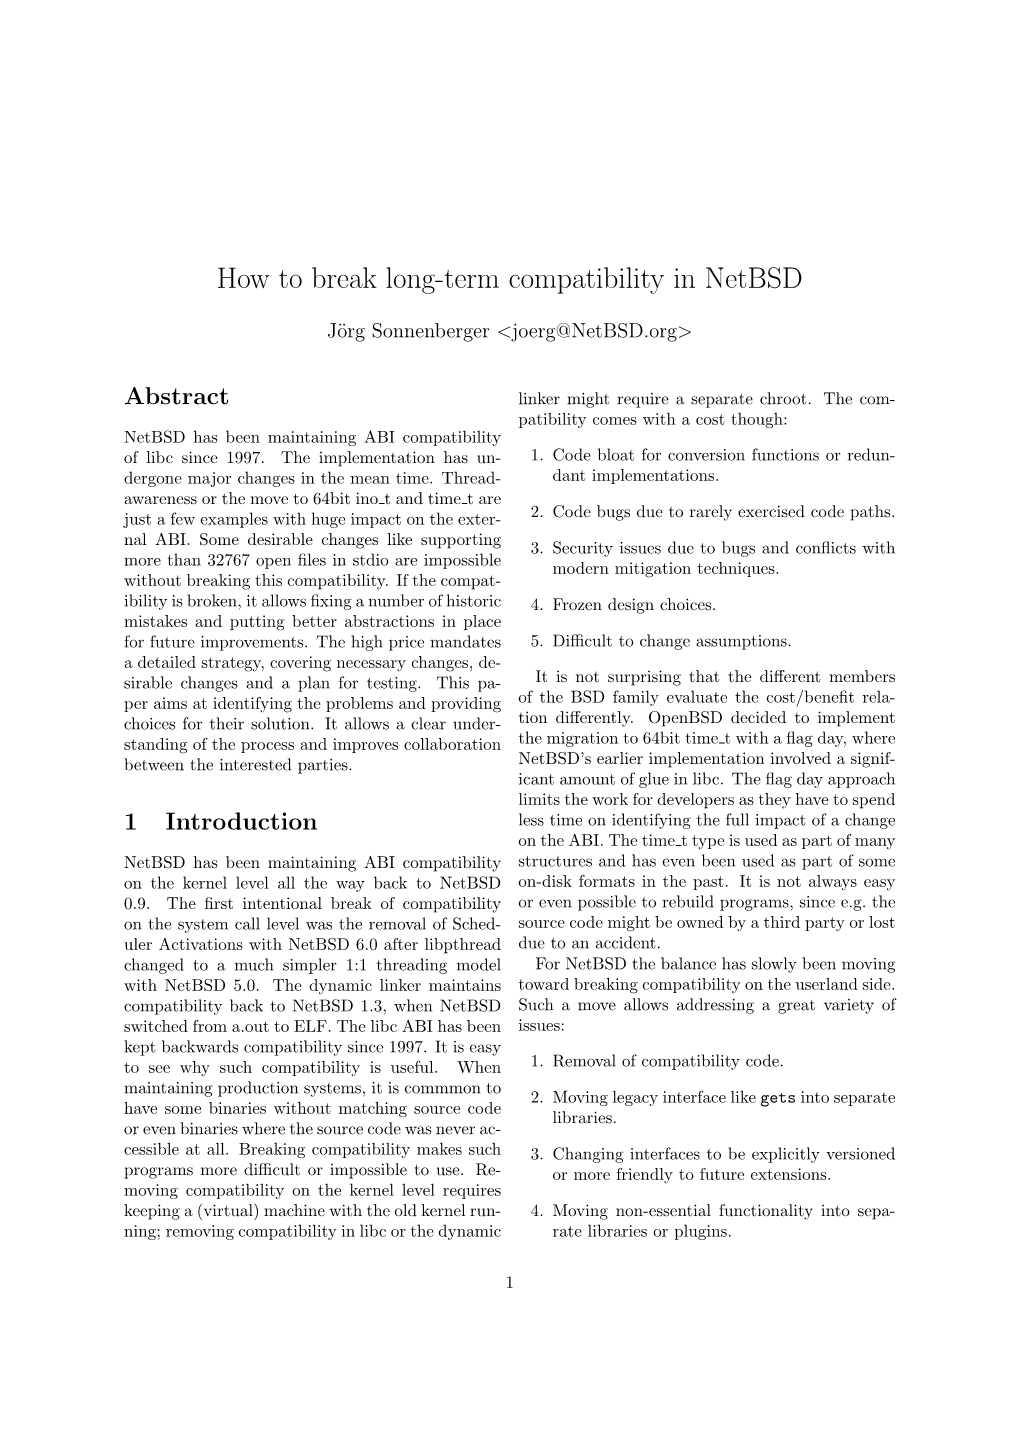 How to Break Long-Term Compatibility in Netbsd